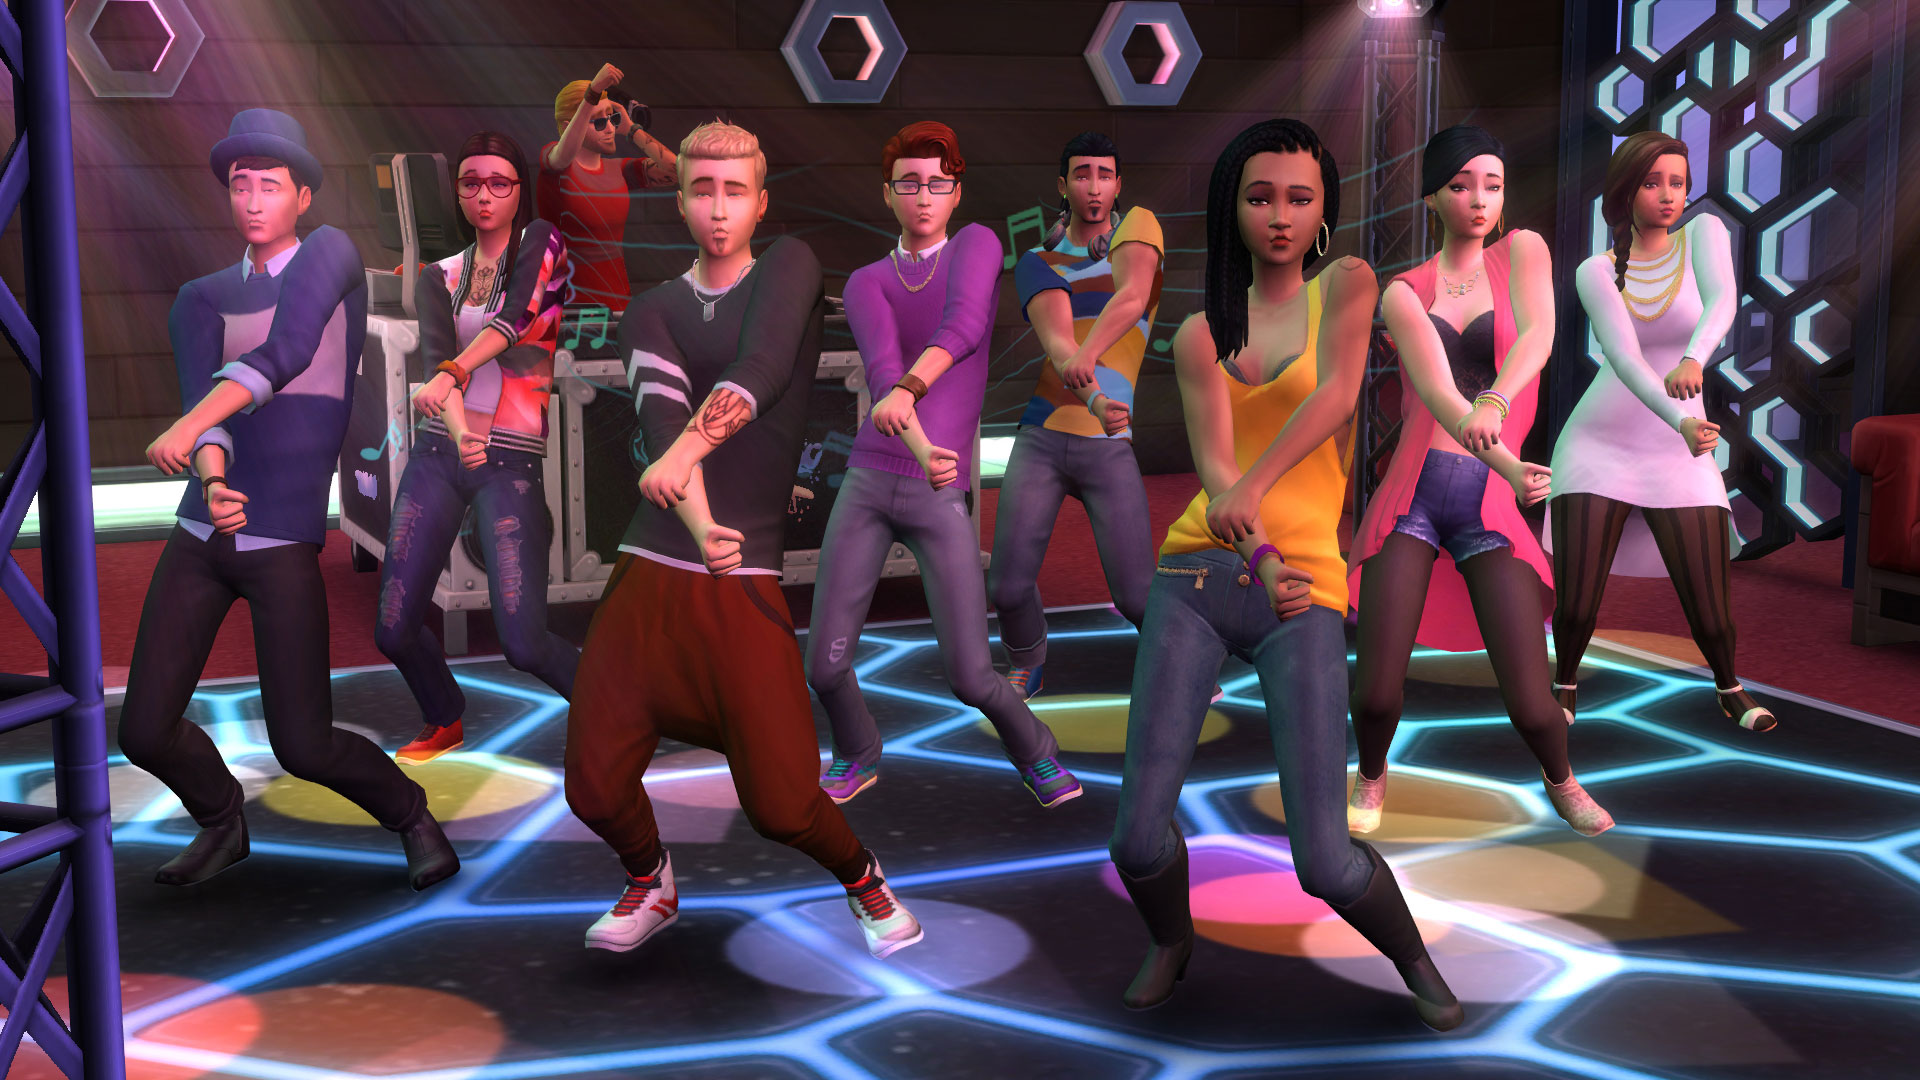 the sims 3 store dance skill